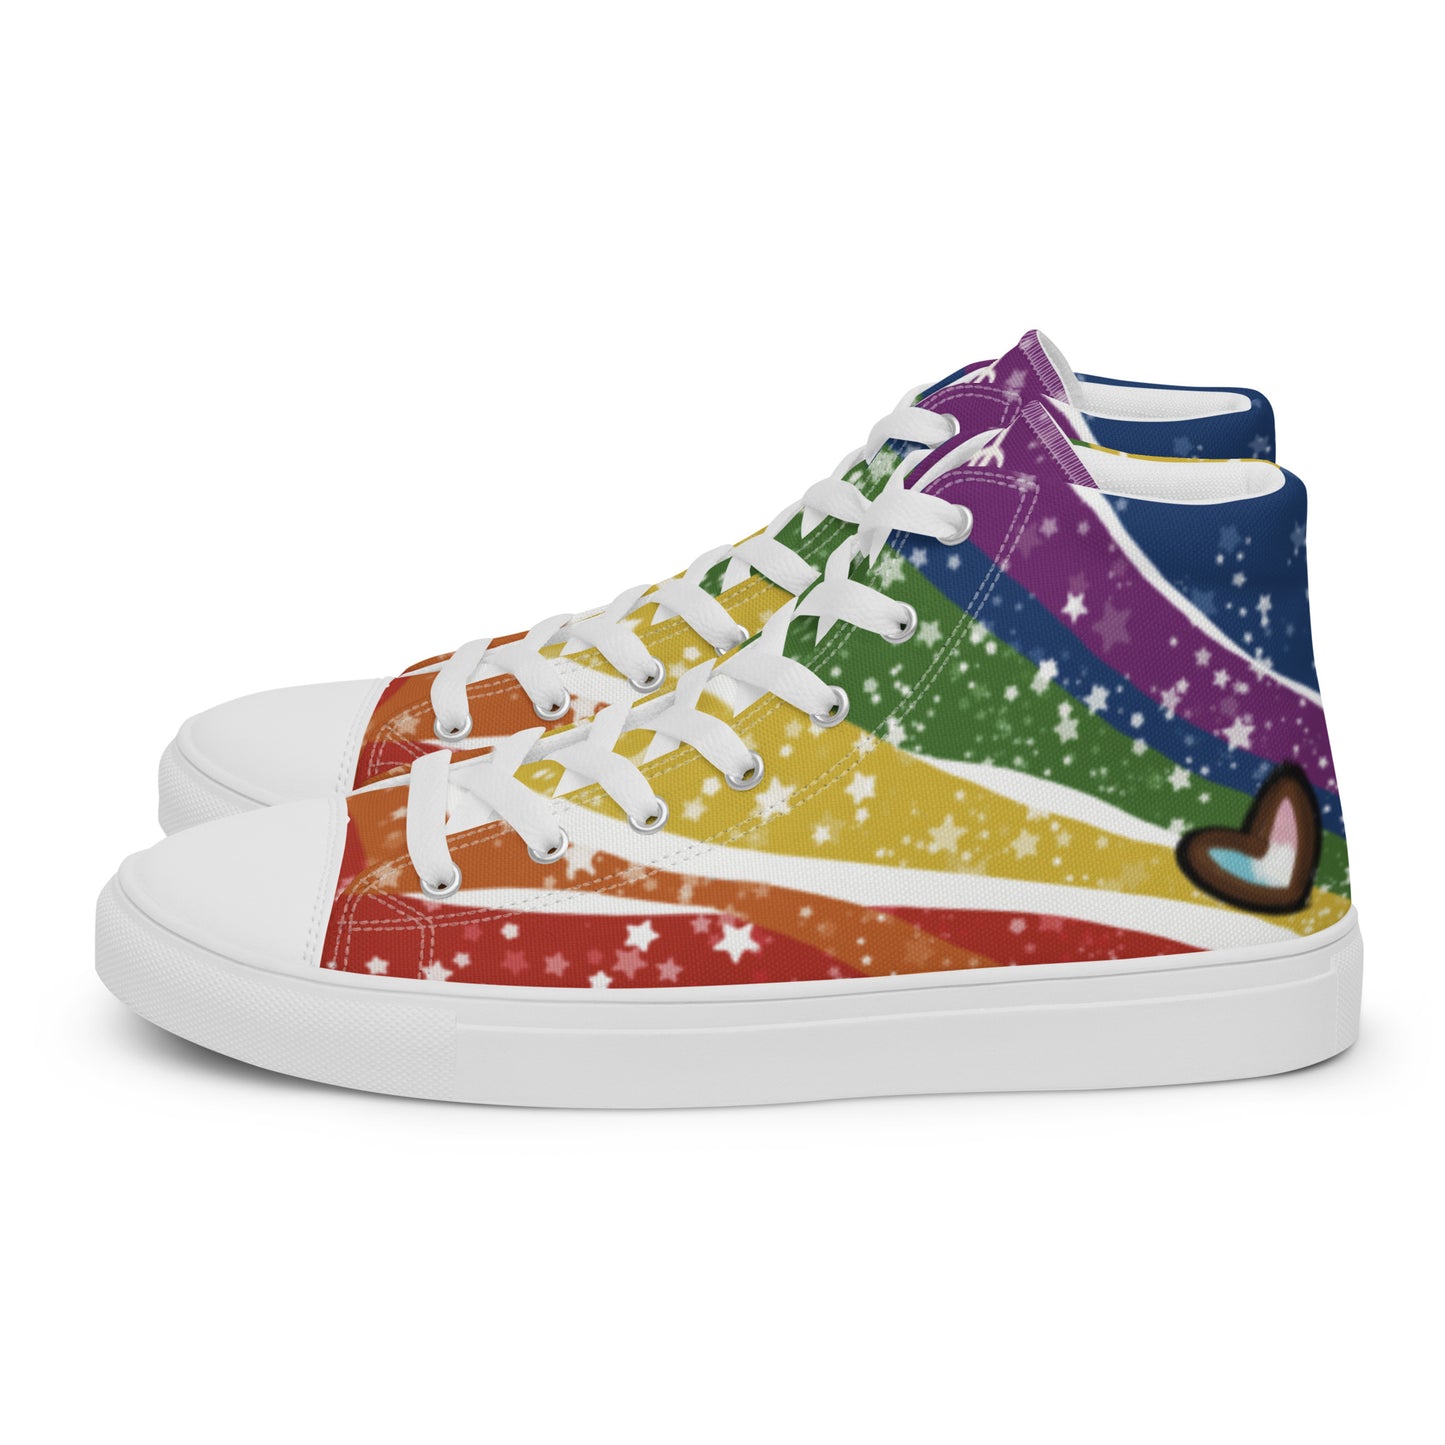 Left side view: A pair of high top shoes have wavy rainbow stripes coming from the heel and getting wider towards the laces, covered in stars, with a double heart in black and brown containing the Trans Pride flag near the heel.